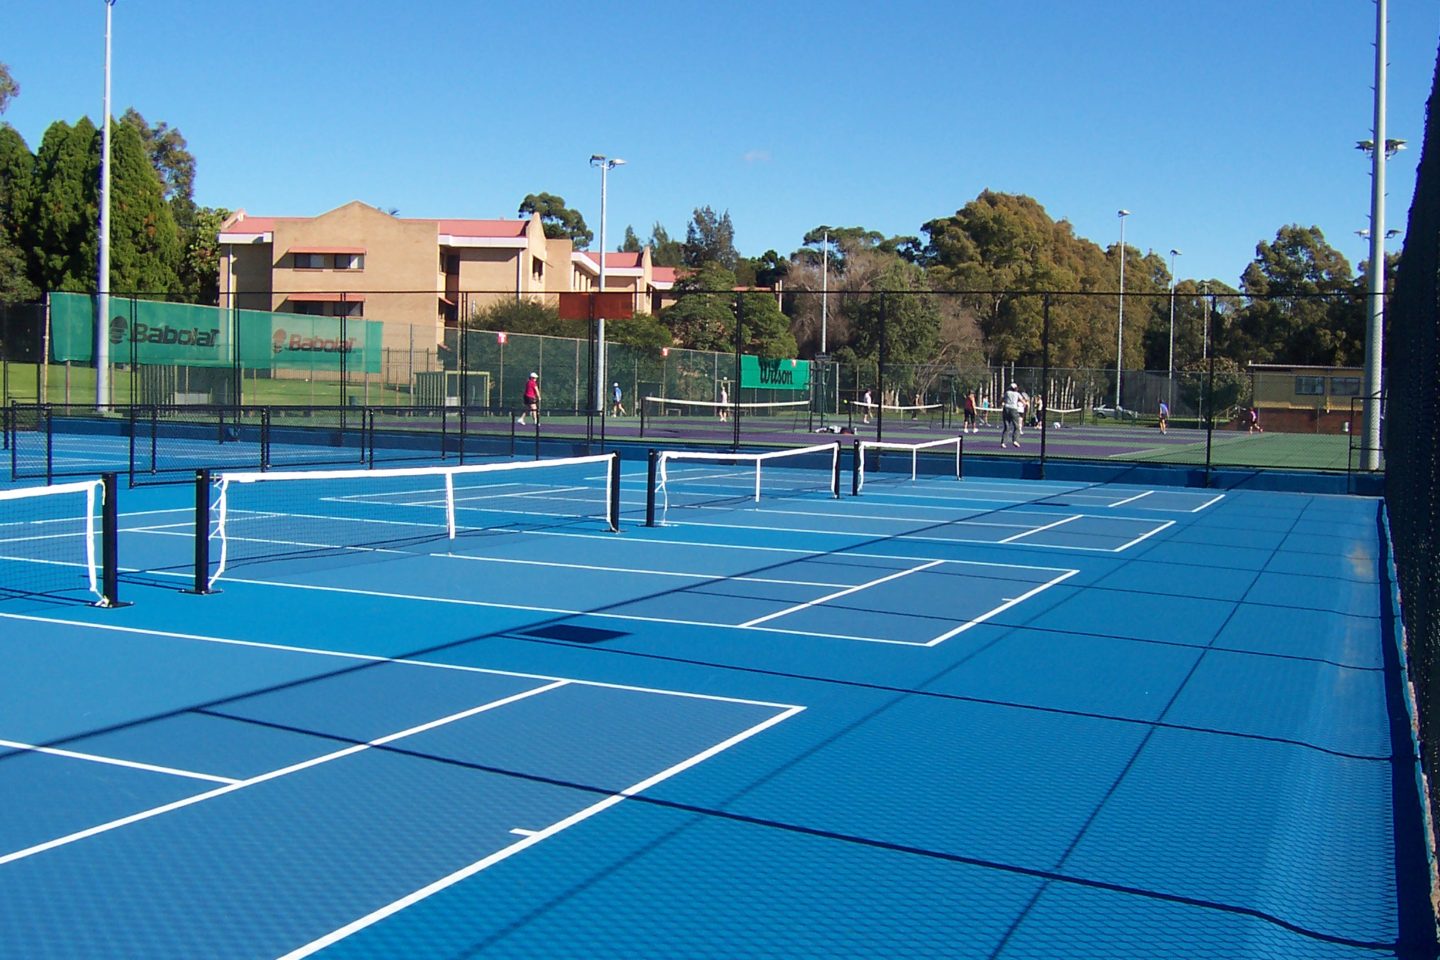 Beaton Park Hot Shots Synthetic Sports Group Cushioned Acrylic Tennis Court